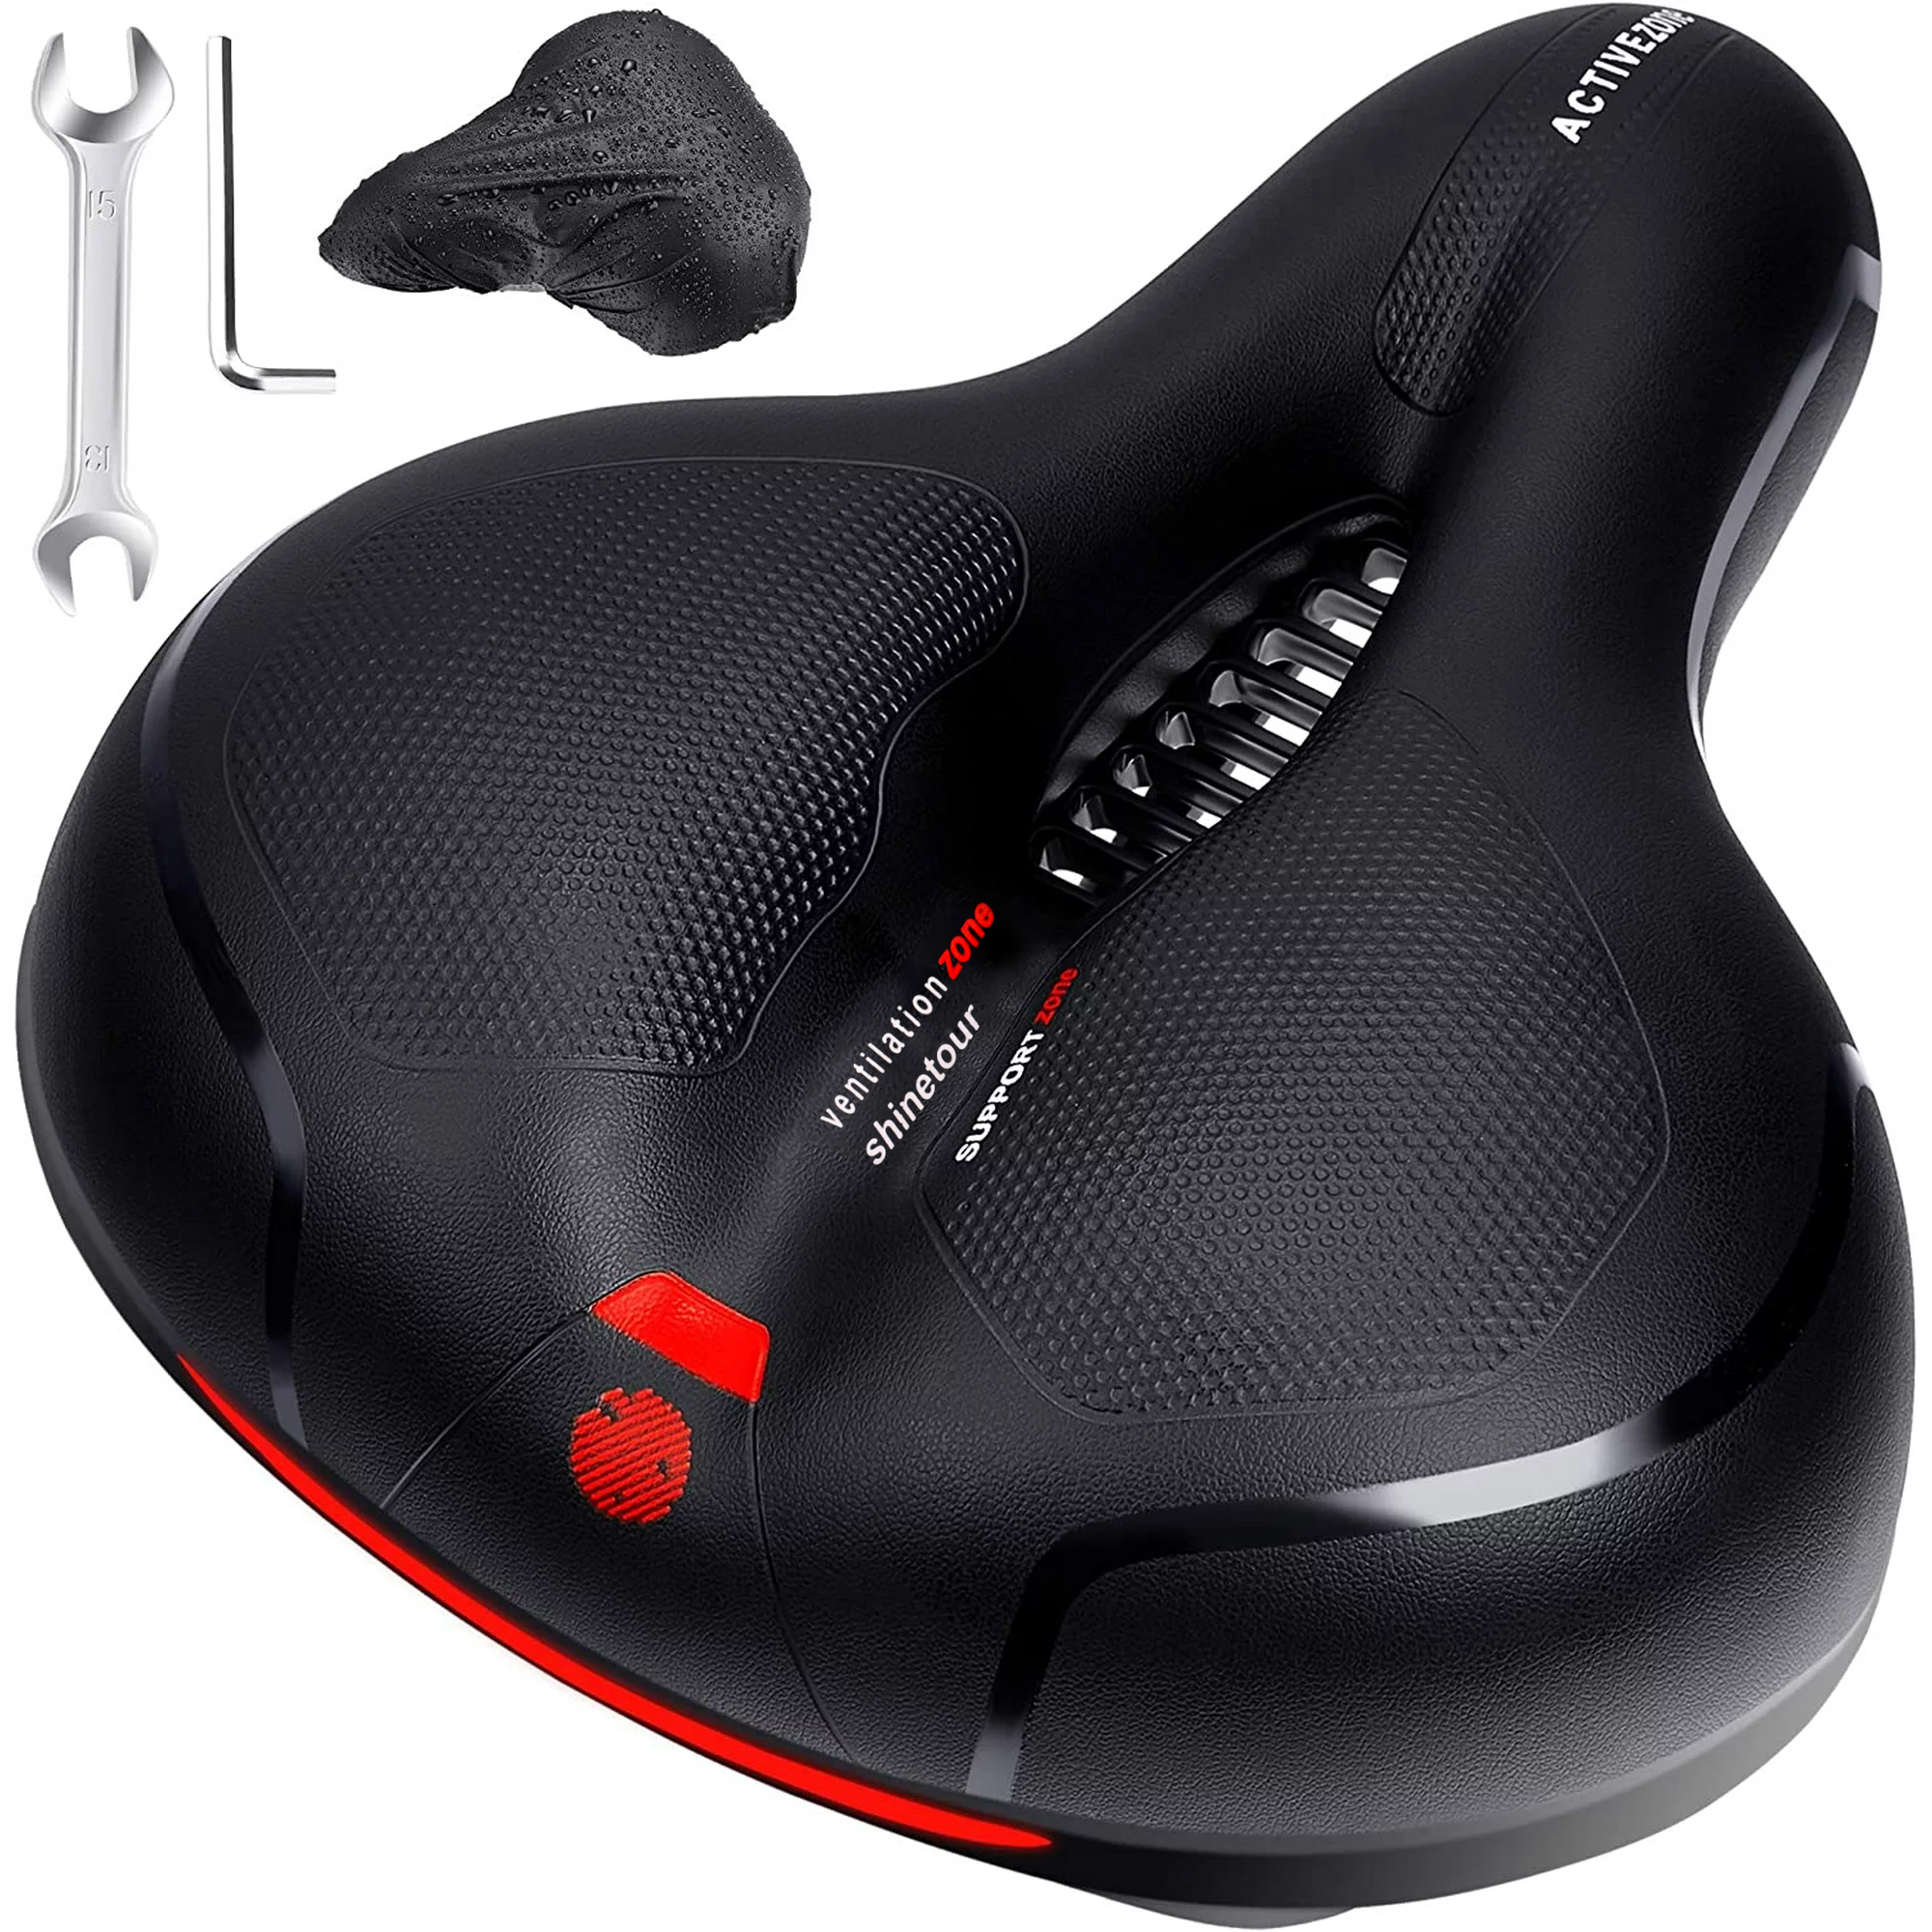 Bike Saddle, BUSATIA Bike Seat Men Women Gel Seat Cushion for Bike, Comfortable Wide 9.8 x 7.9 x 3.5in Thickness Soft Bicycle Seat, Black Waterproof for City Mountain Bike MTB, with Installation Tools - image 1 of 7